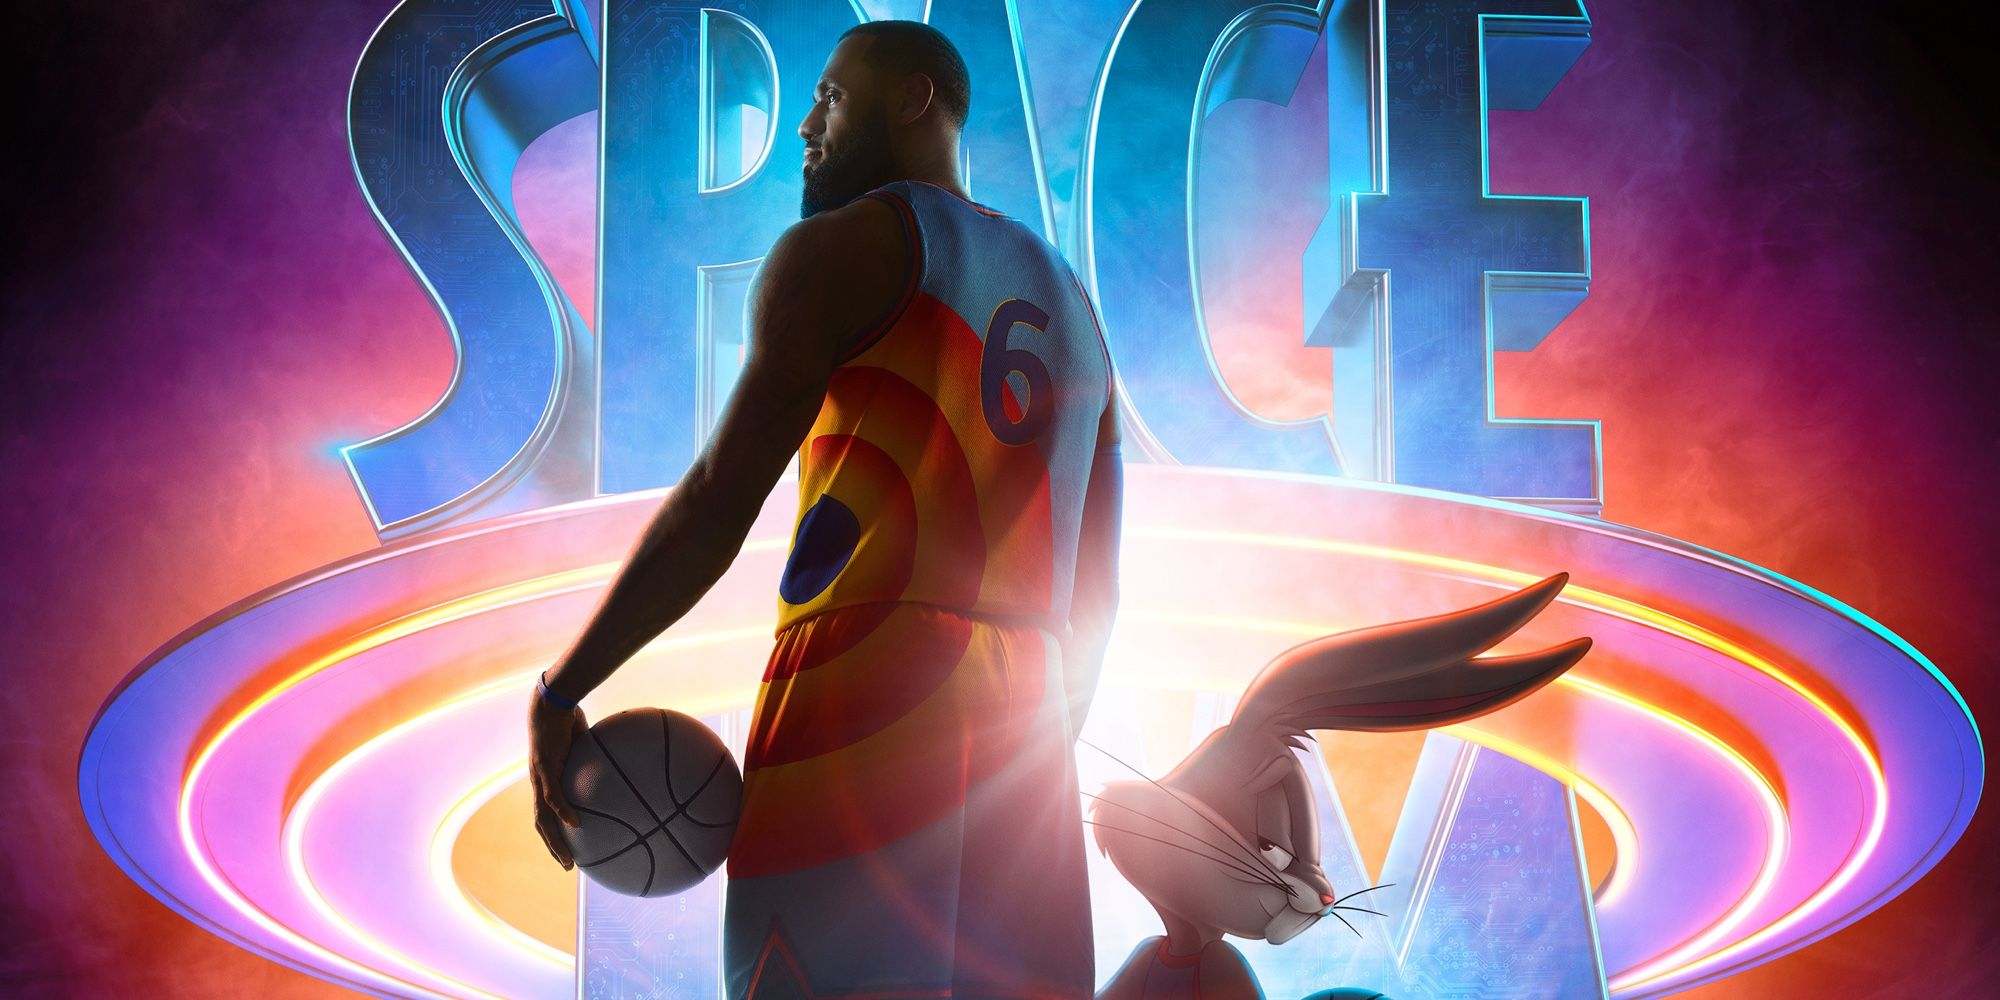 Trailer for LeBron James-led 'Space Jam: A New Legacy' released